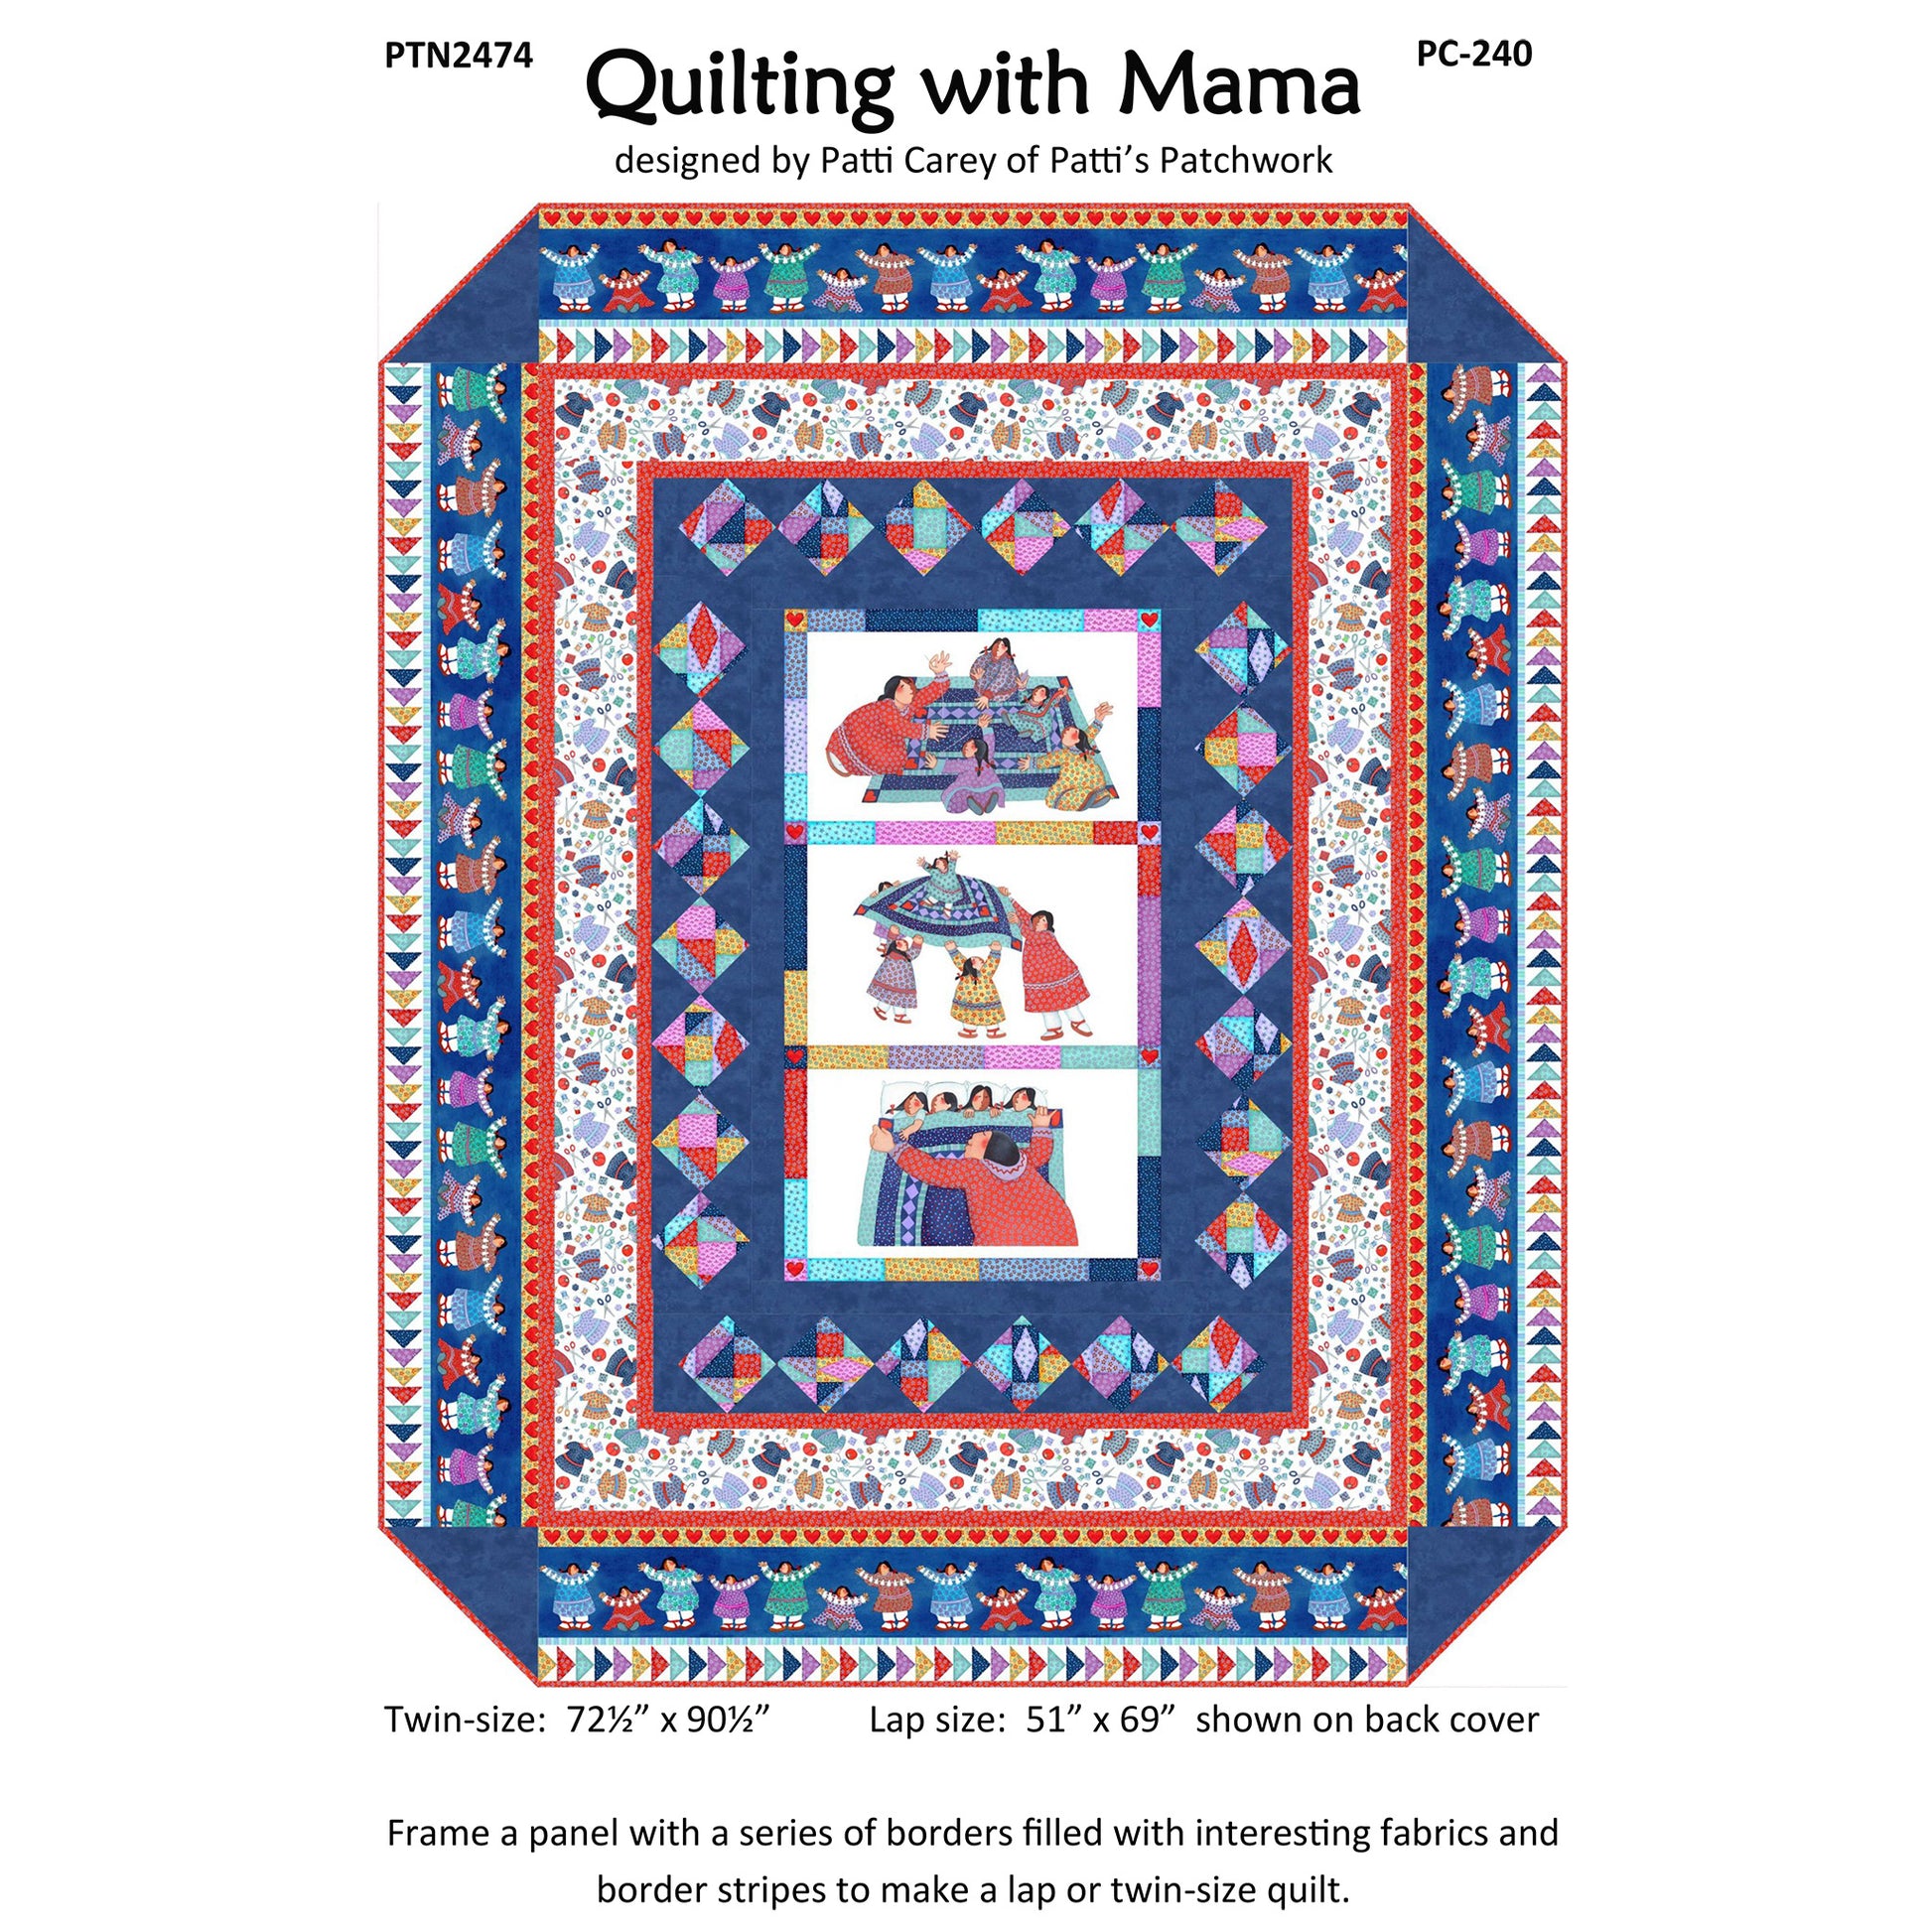 Cover image of the Quilting with Mama Pattern PC-240